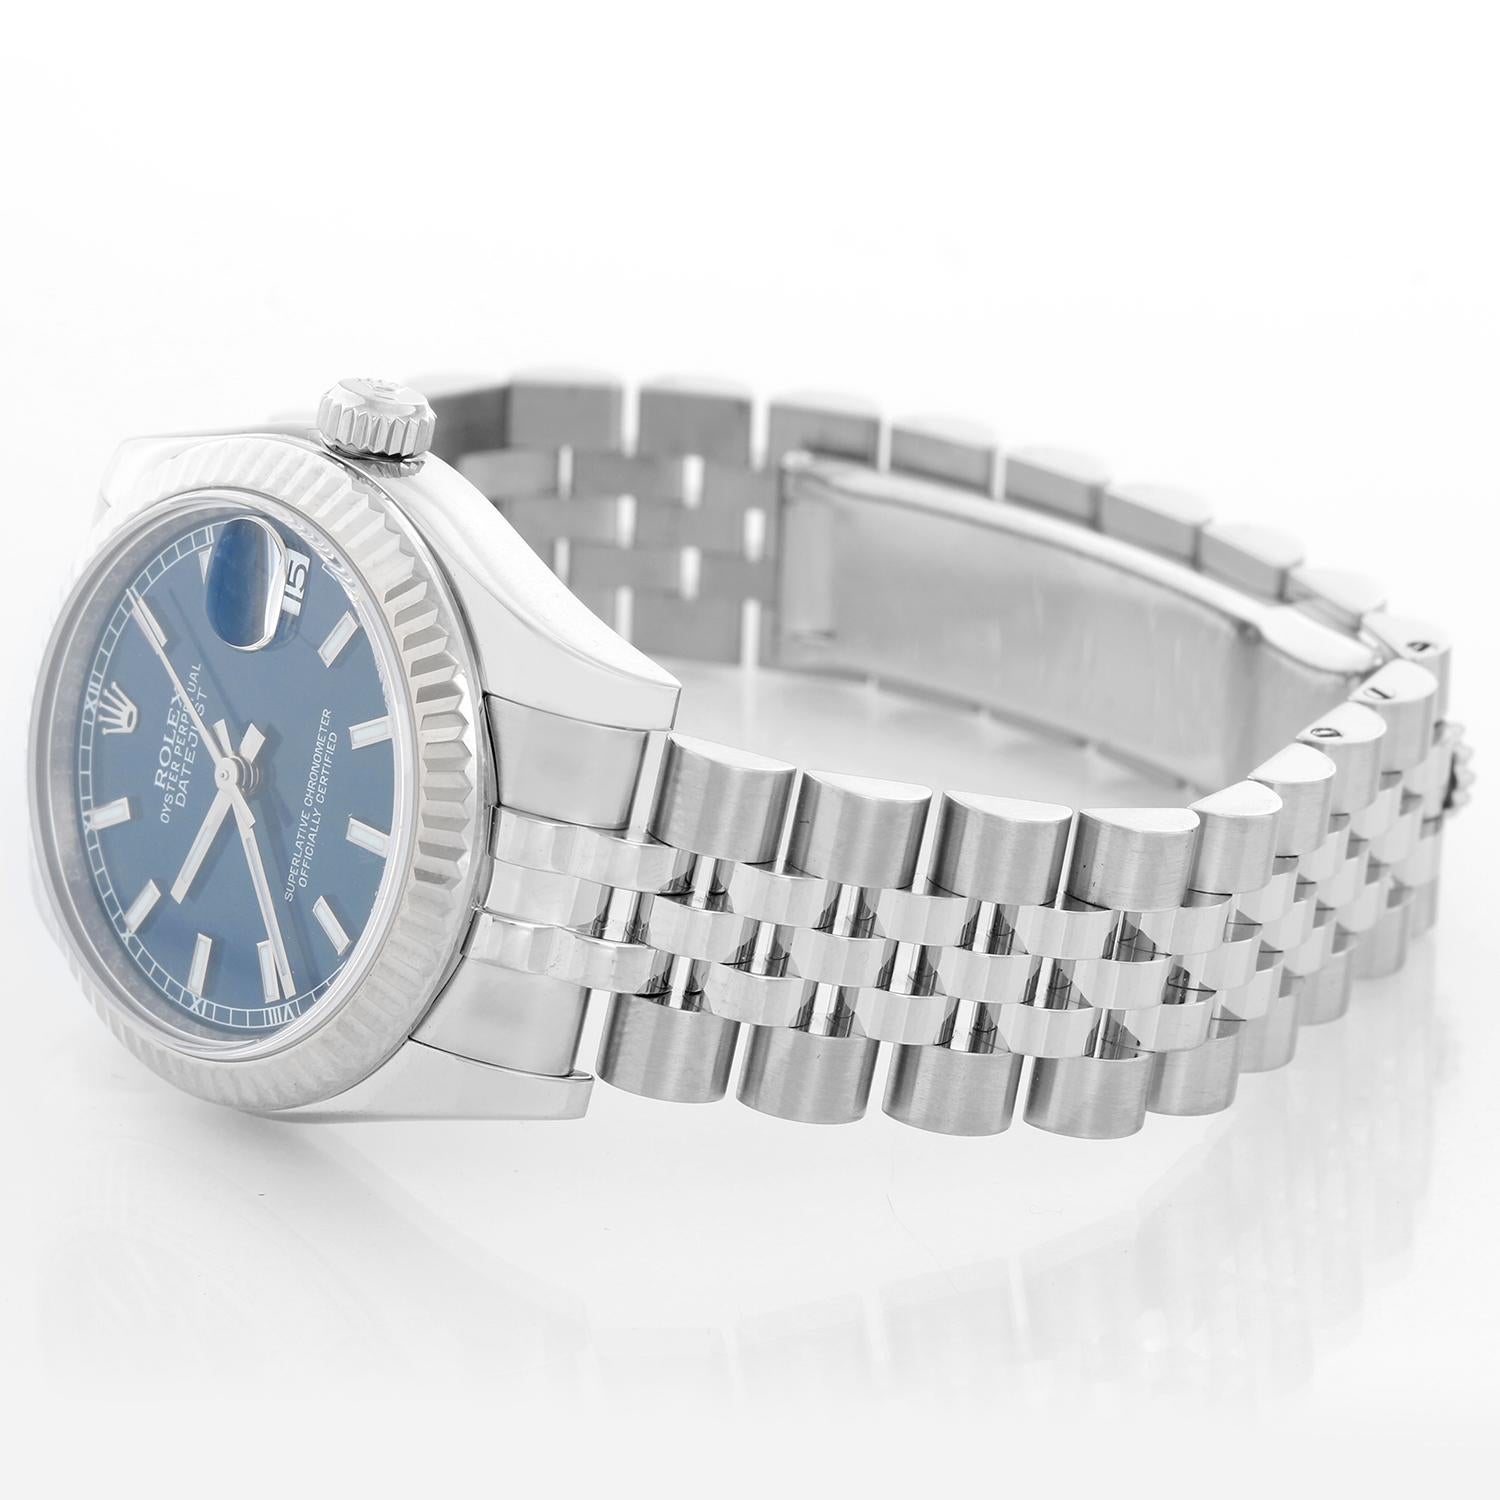 Rolex Datejust Midsize Men's or Ladies Steel Watch 178274 - Automatic winding; 31 jewel; sapphire crystal. Stainless steel case with 18k white gold fluted bezel (31mm diameter). Blue dial with stick hour markers . Stainless steel hidden-clasp